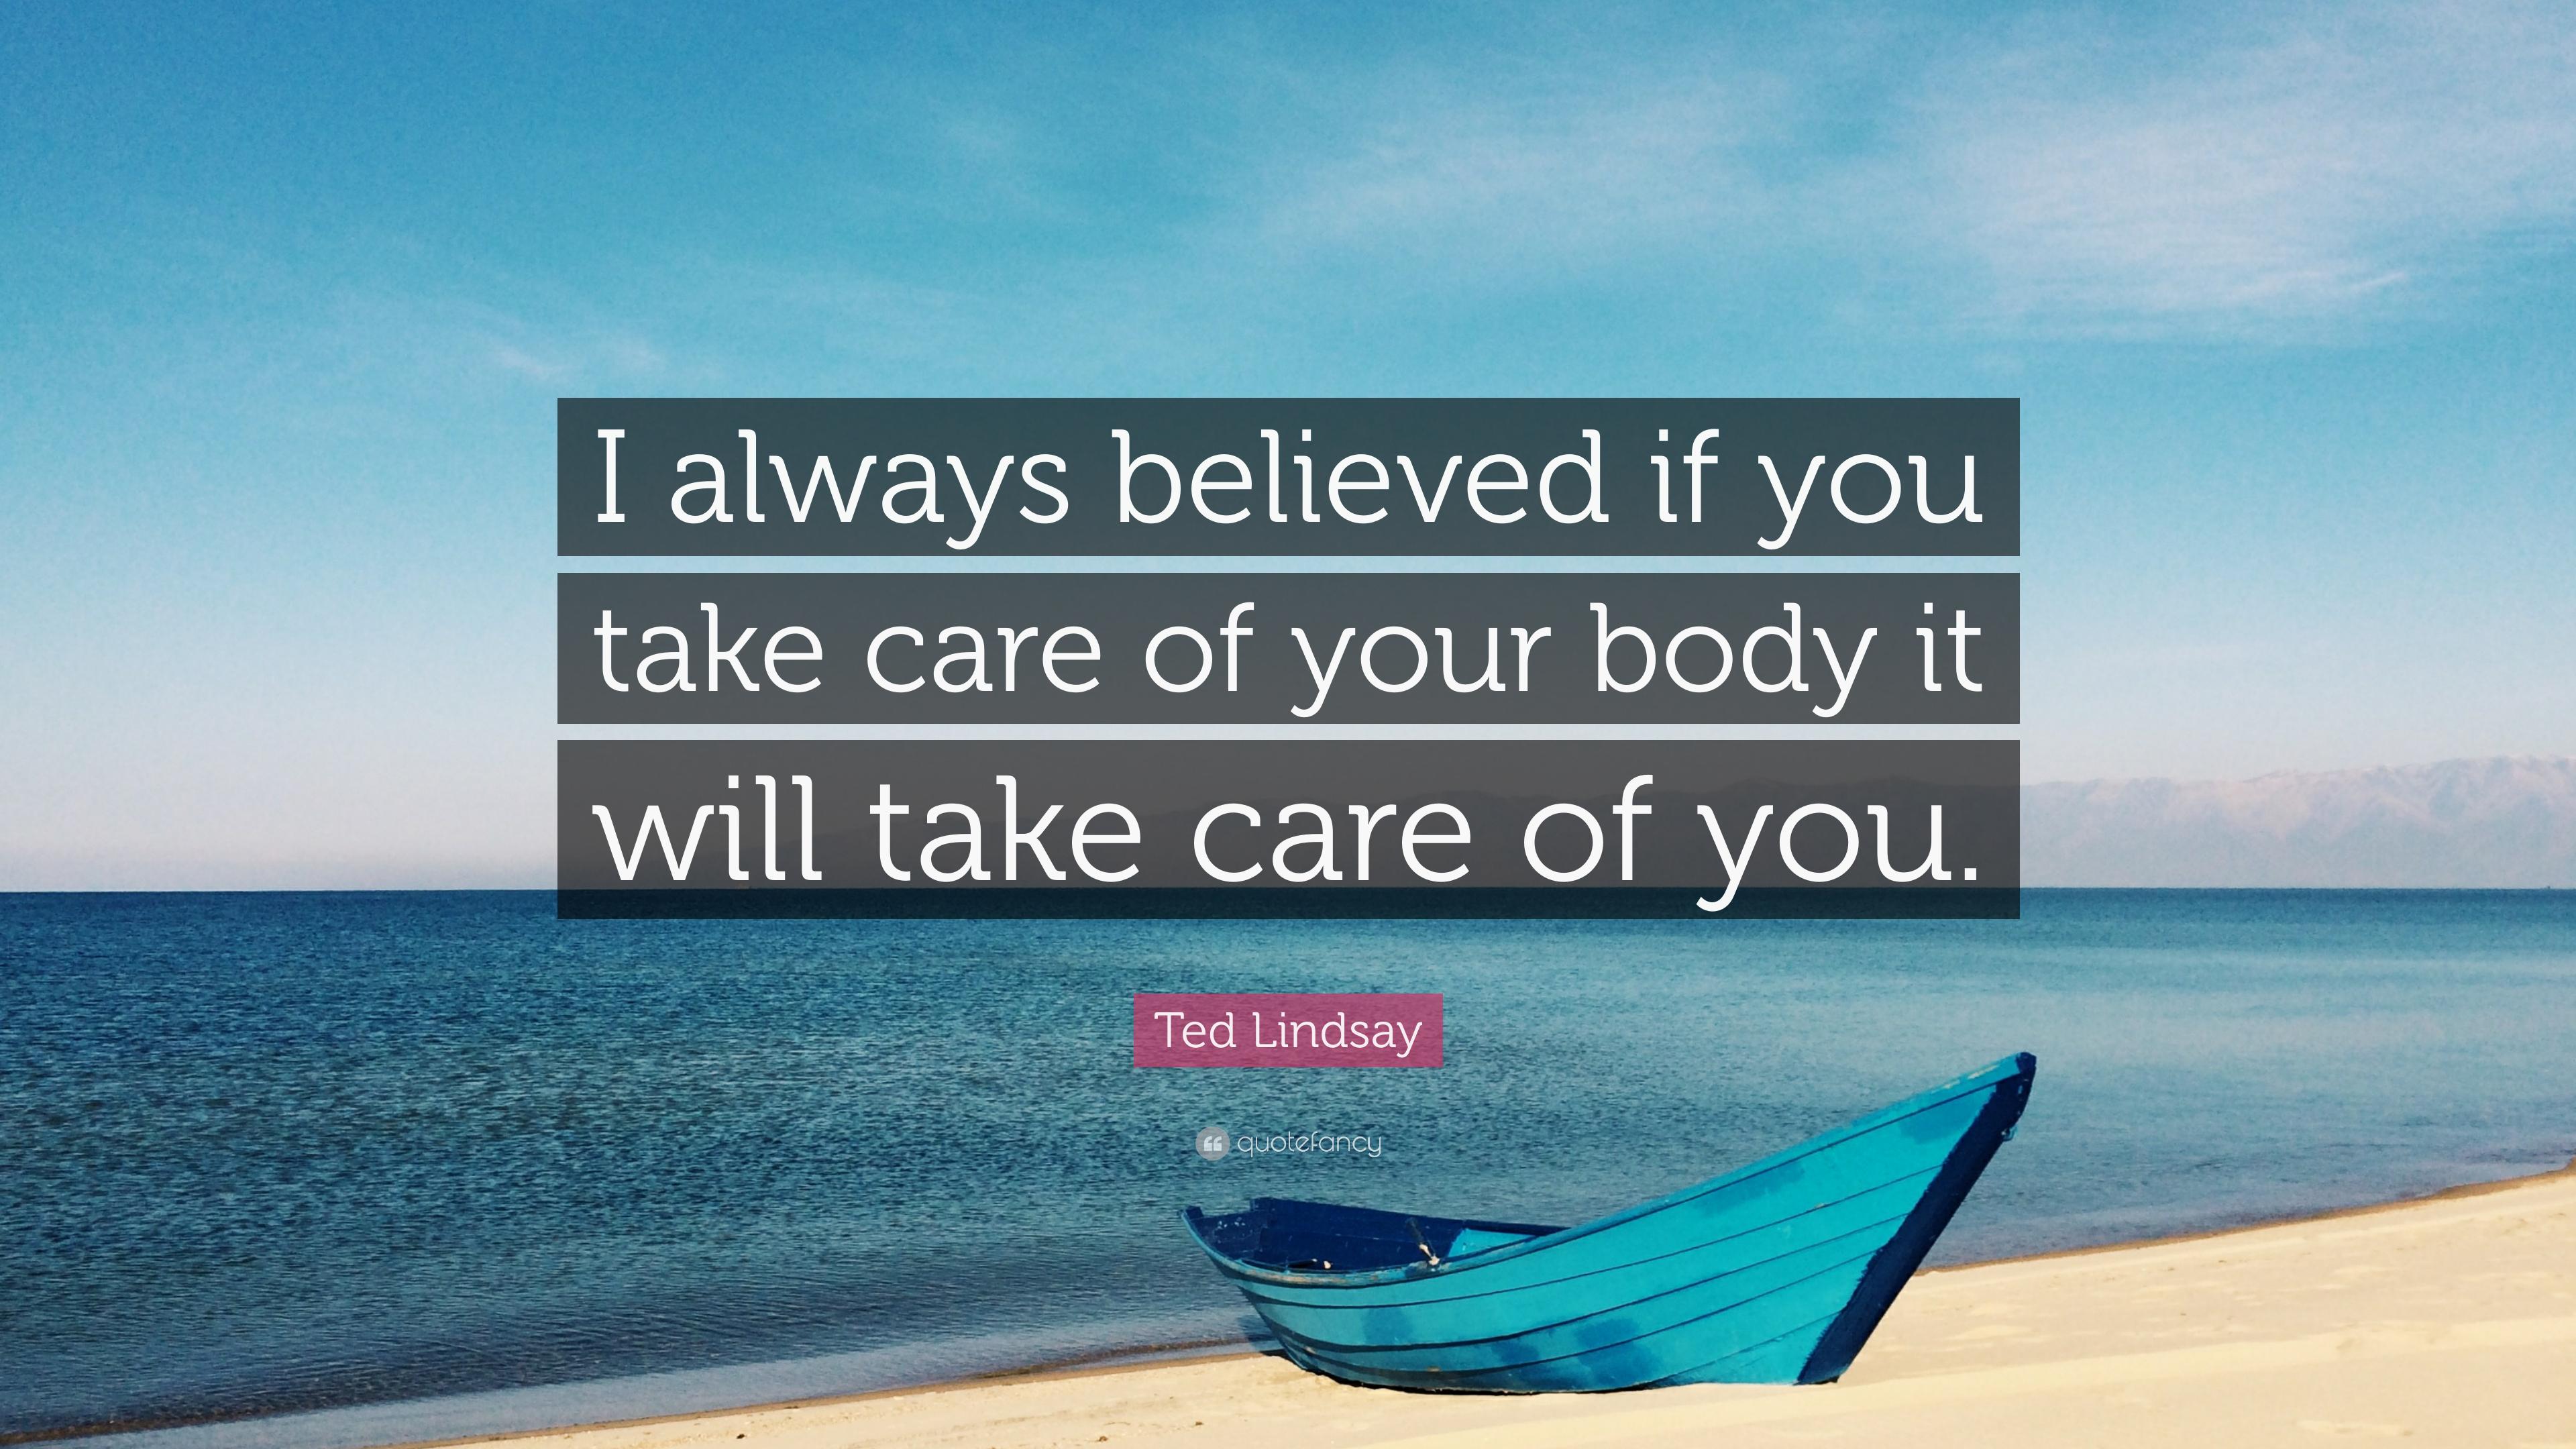 Ted Lindsay Quote: “I always believed if you take care of your body